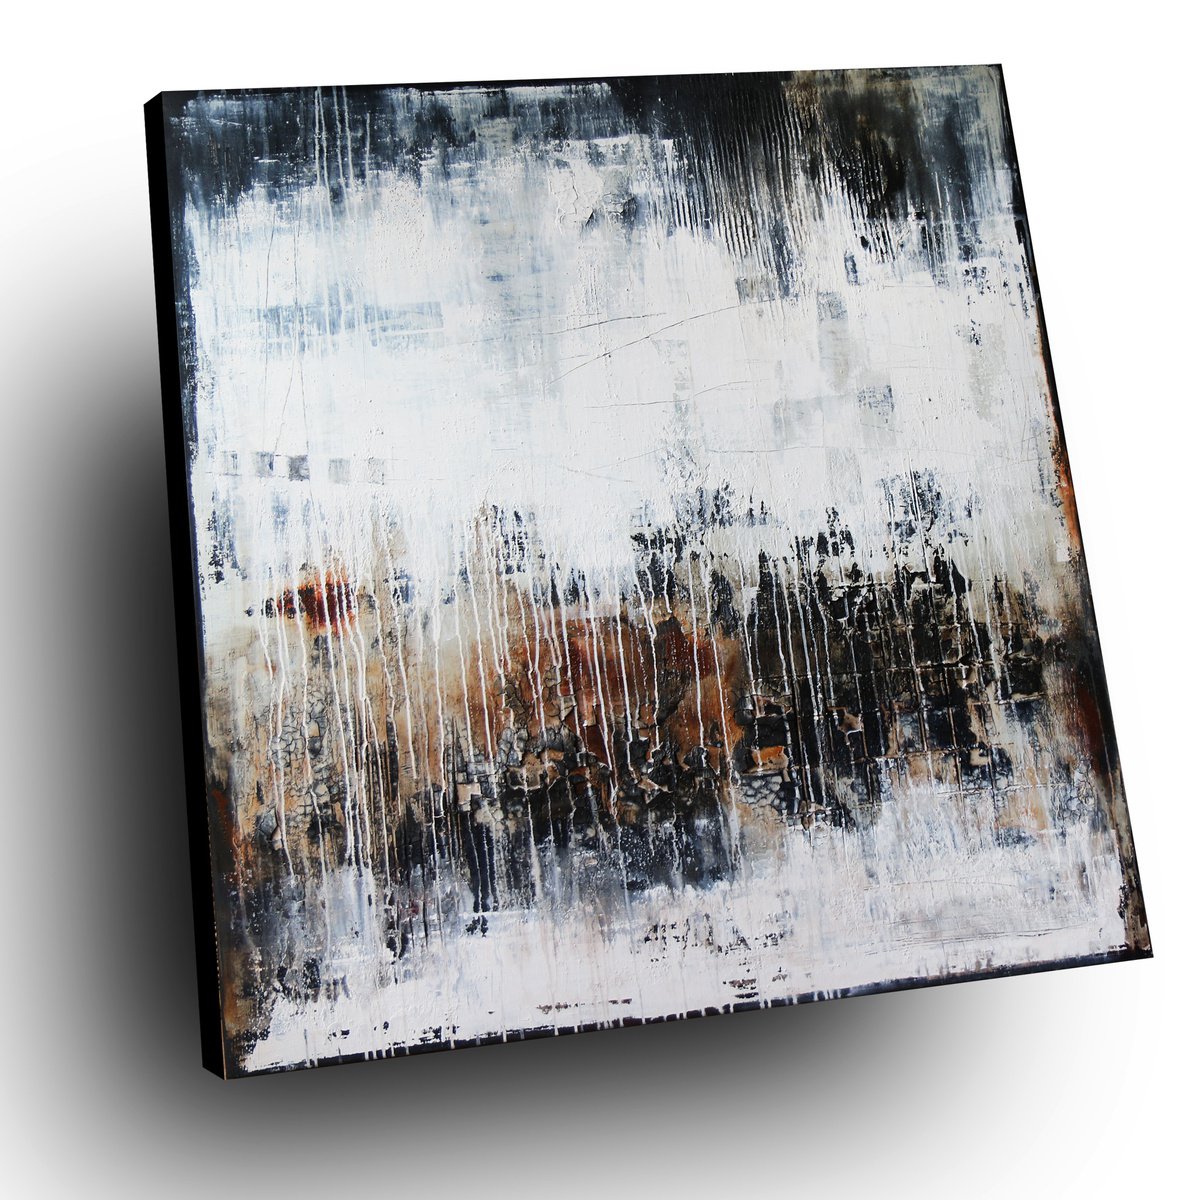 MAGIE NOIRE - ABSTRACT ACRYLIC PAINTING TEXTURED * CONTRASTING COLORS * READY TO HANG by Inez Froehlich